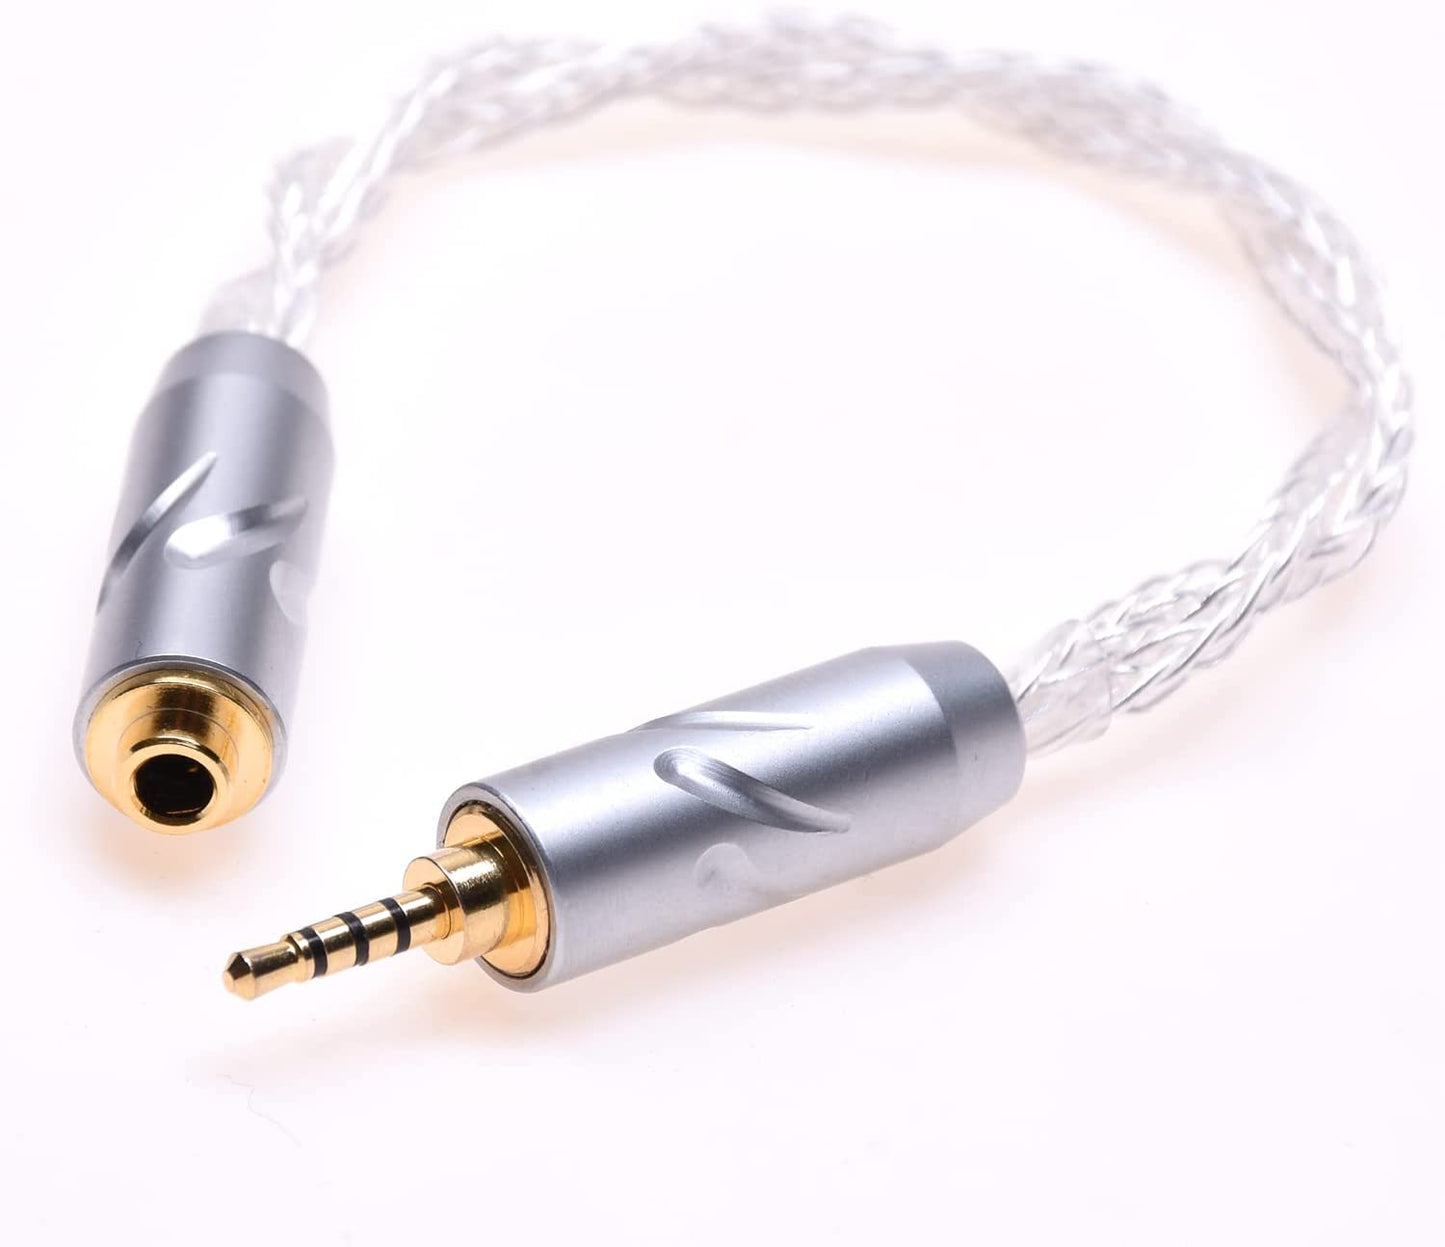 2.5mm Adapter 16 Cores Silver Plated Cable trrs 2.5mm Male to 3.5mm Female trrs Balanced Audio Adapter Cable